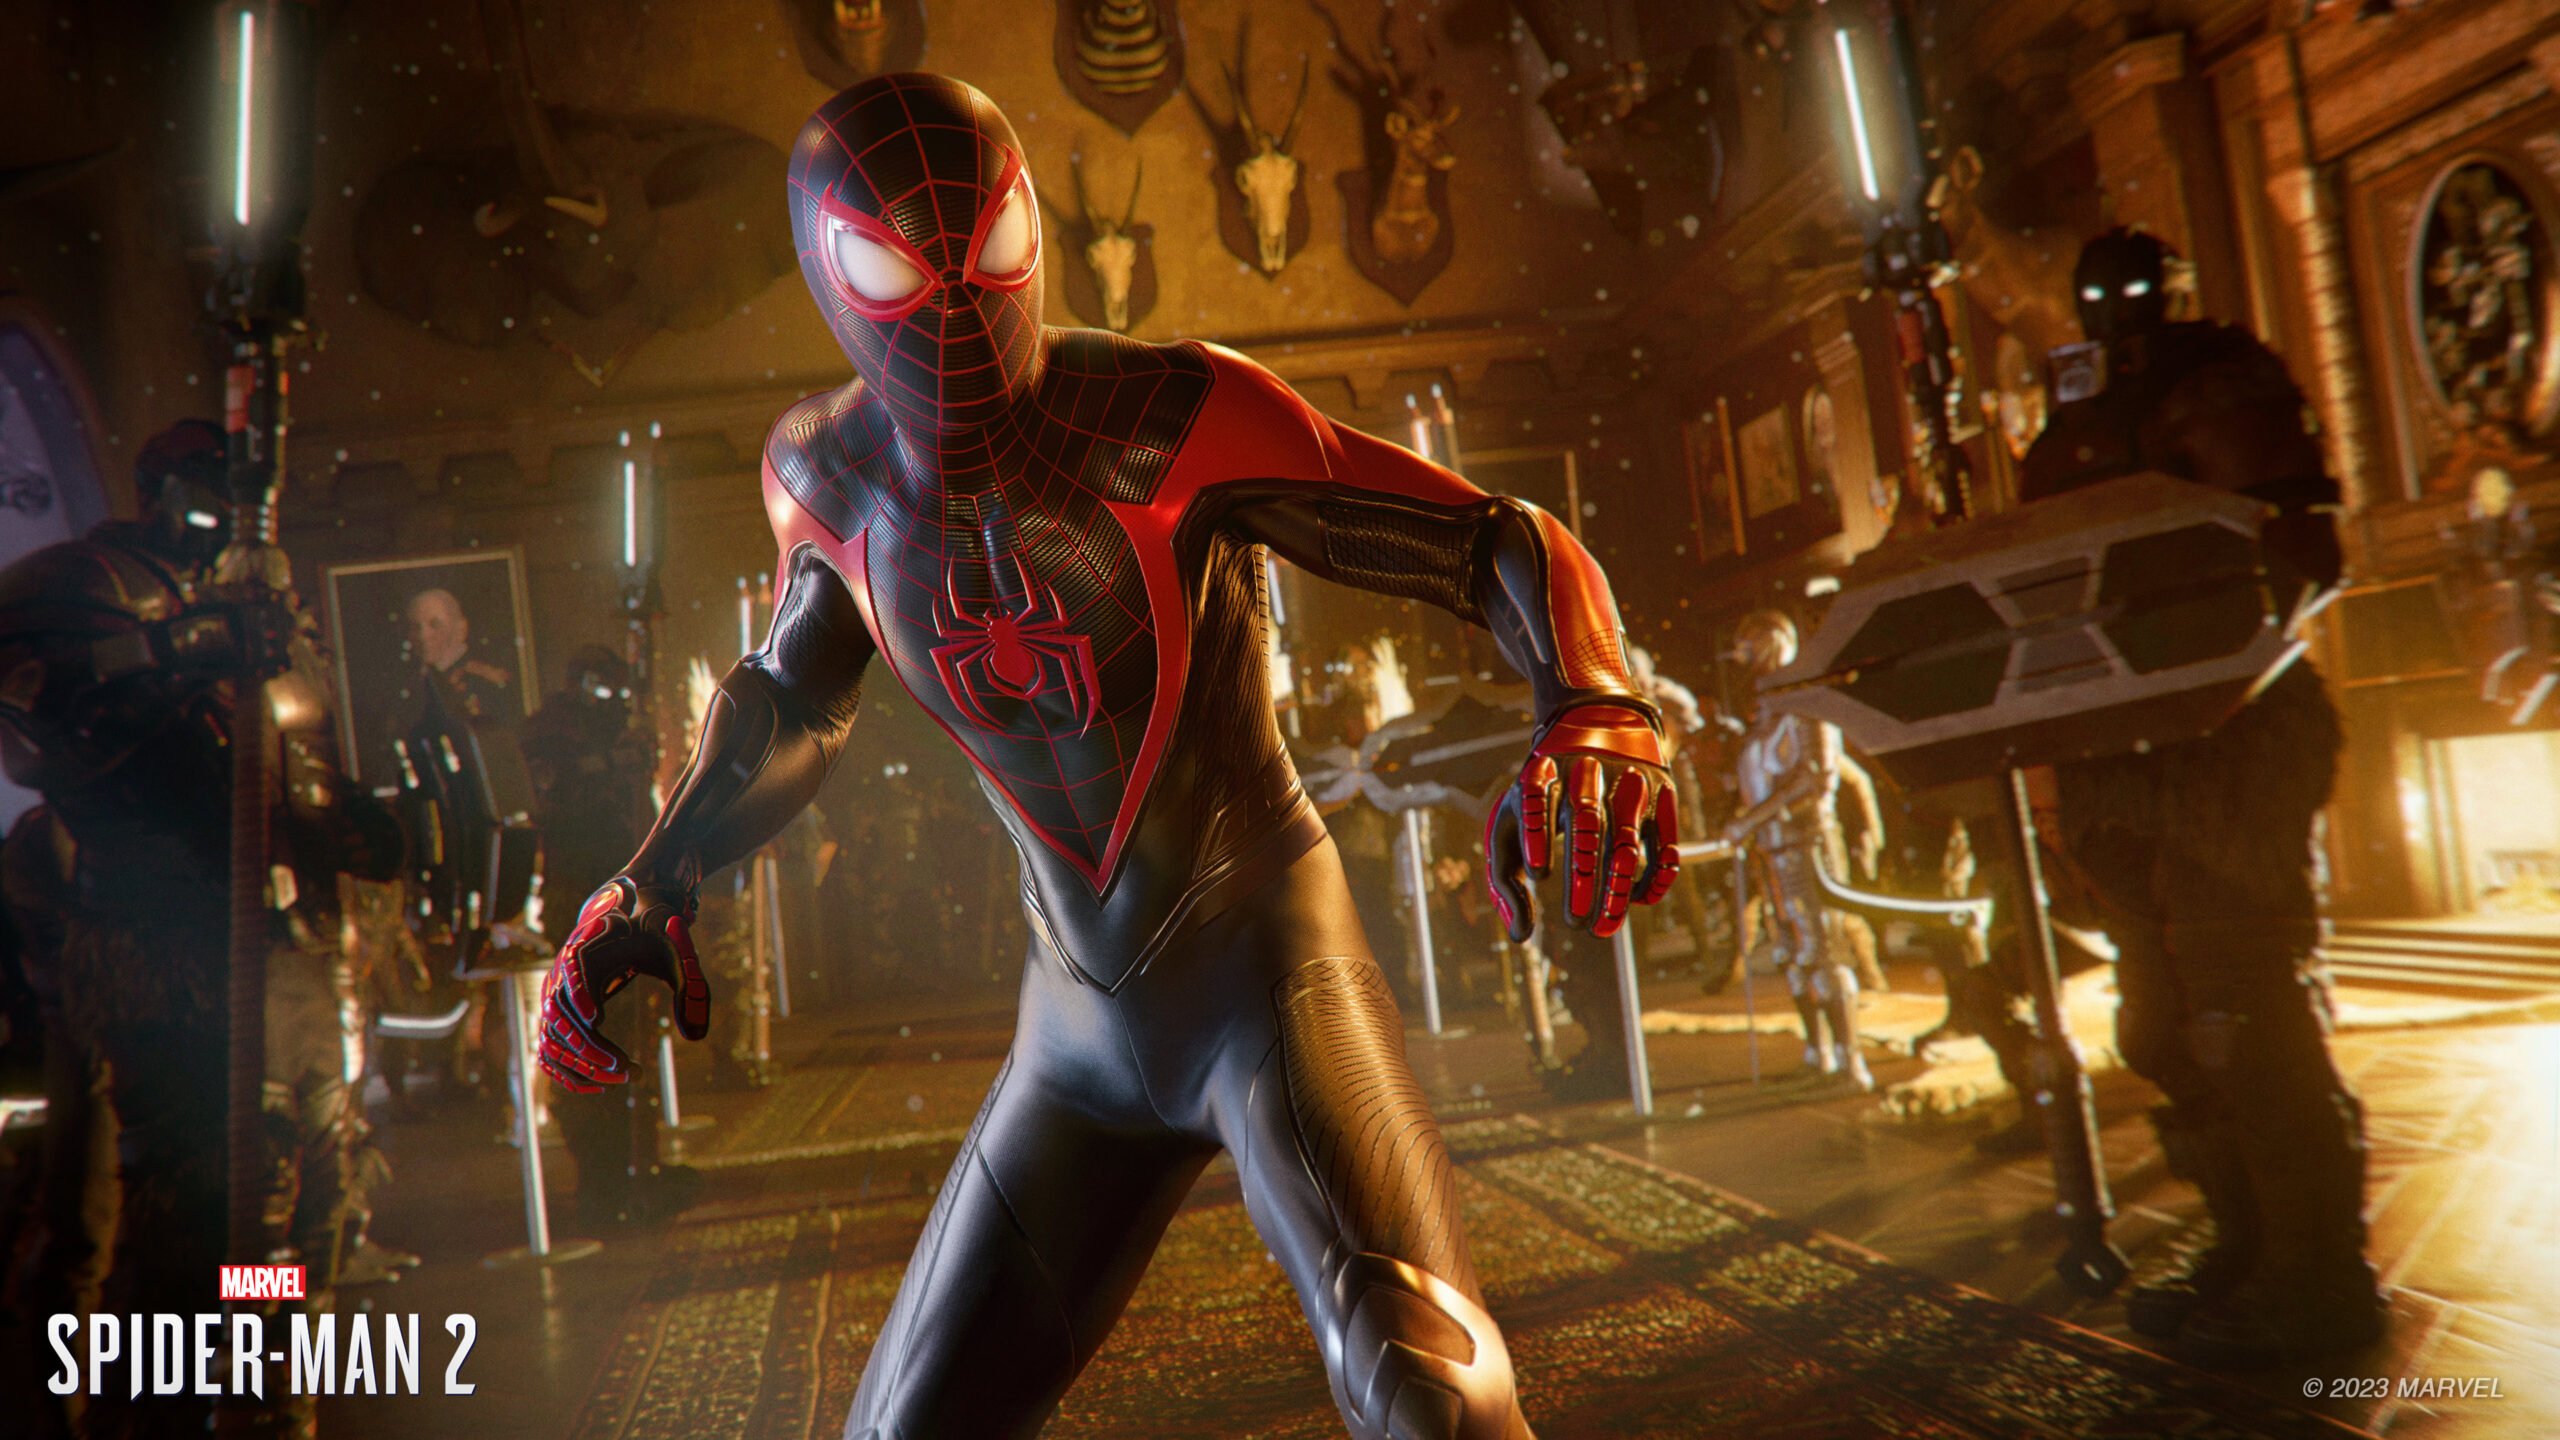 It looks like Spider-Man 2 could be banned or delayed in the Middle East